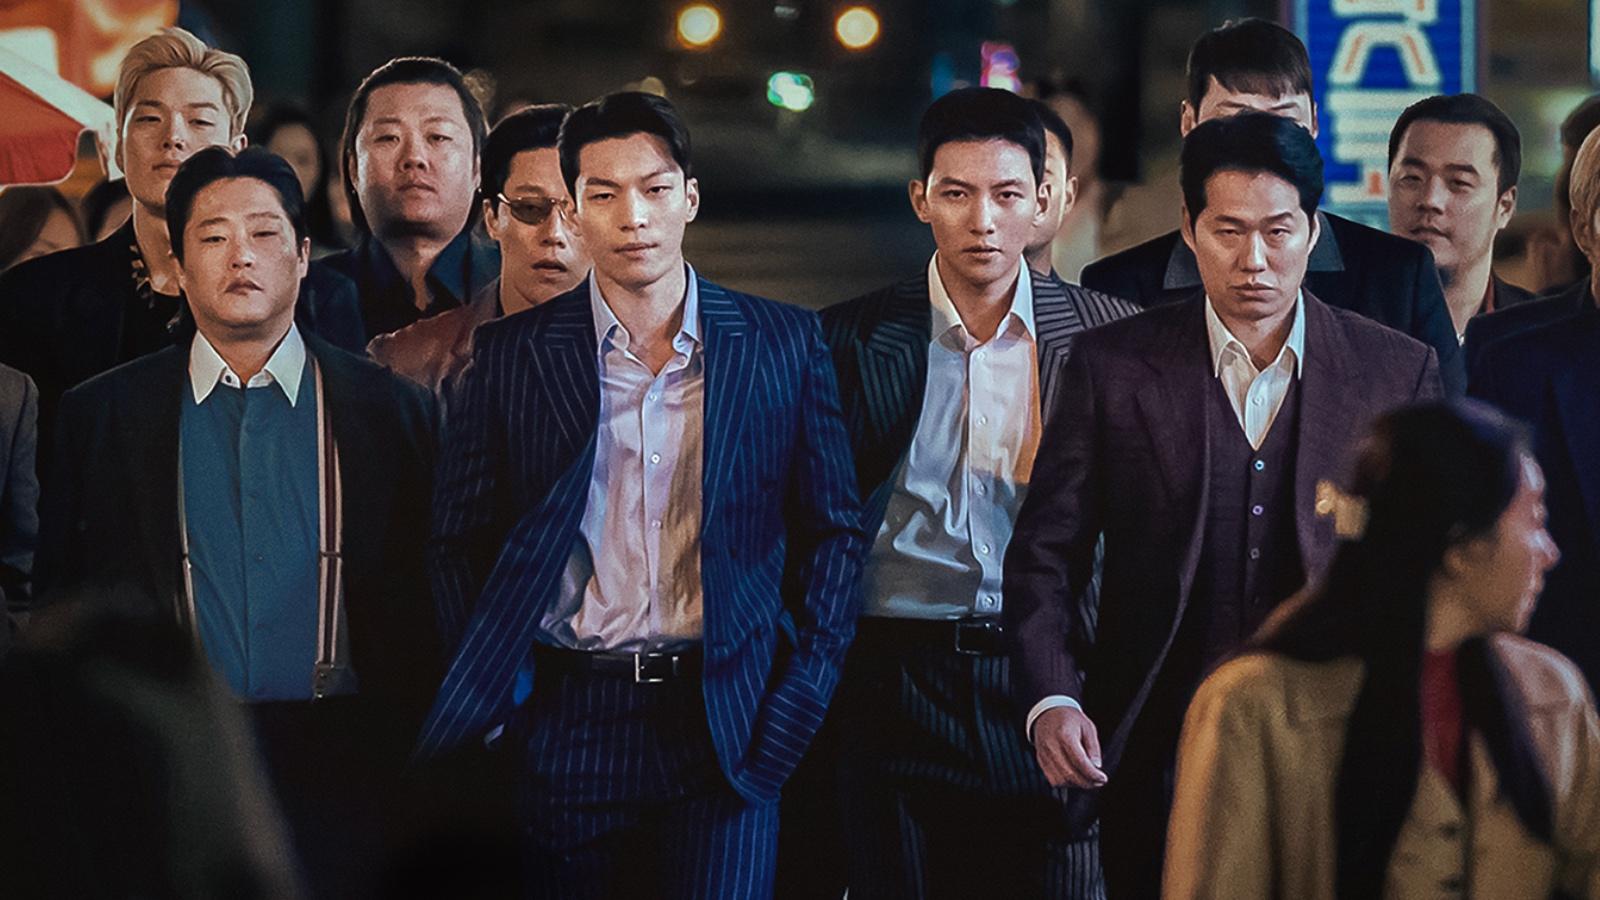 Disney+'s main poster for The Worst of Evil with Wi Ha-joon and Ji Chang-wook